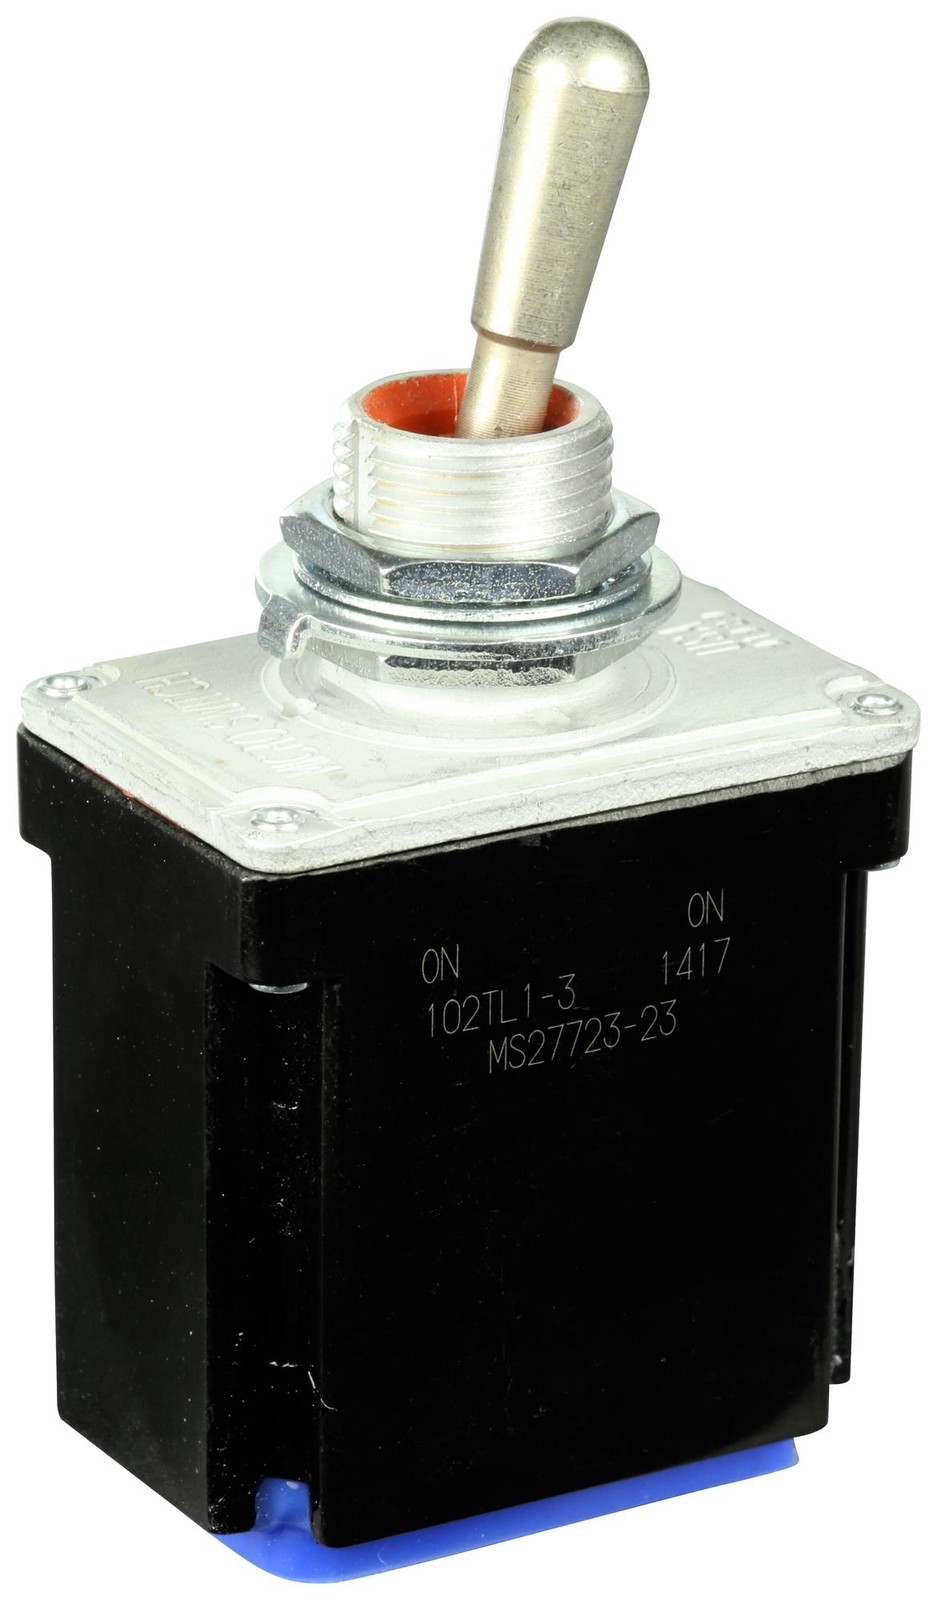 Honeywell 102Tl1-3 Toggle Switch, Dpdt, 20A, 277Vac/250Vdc